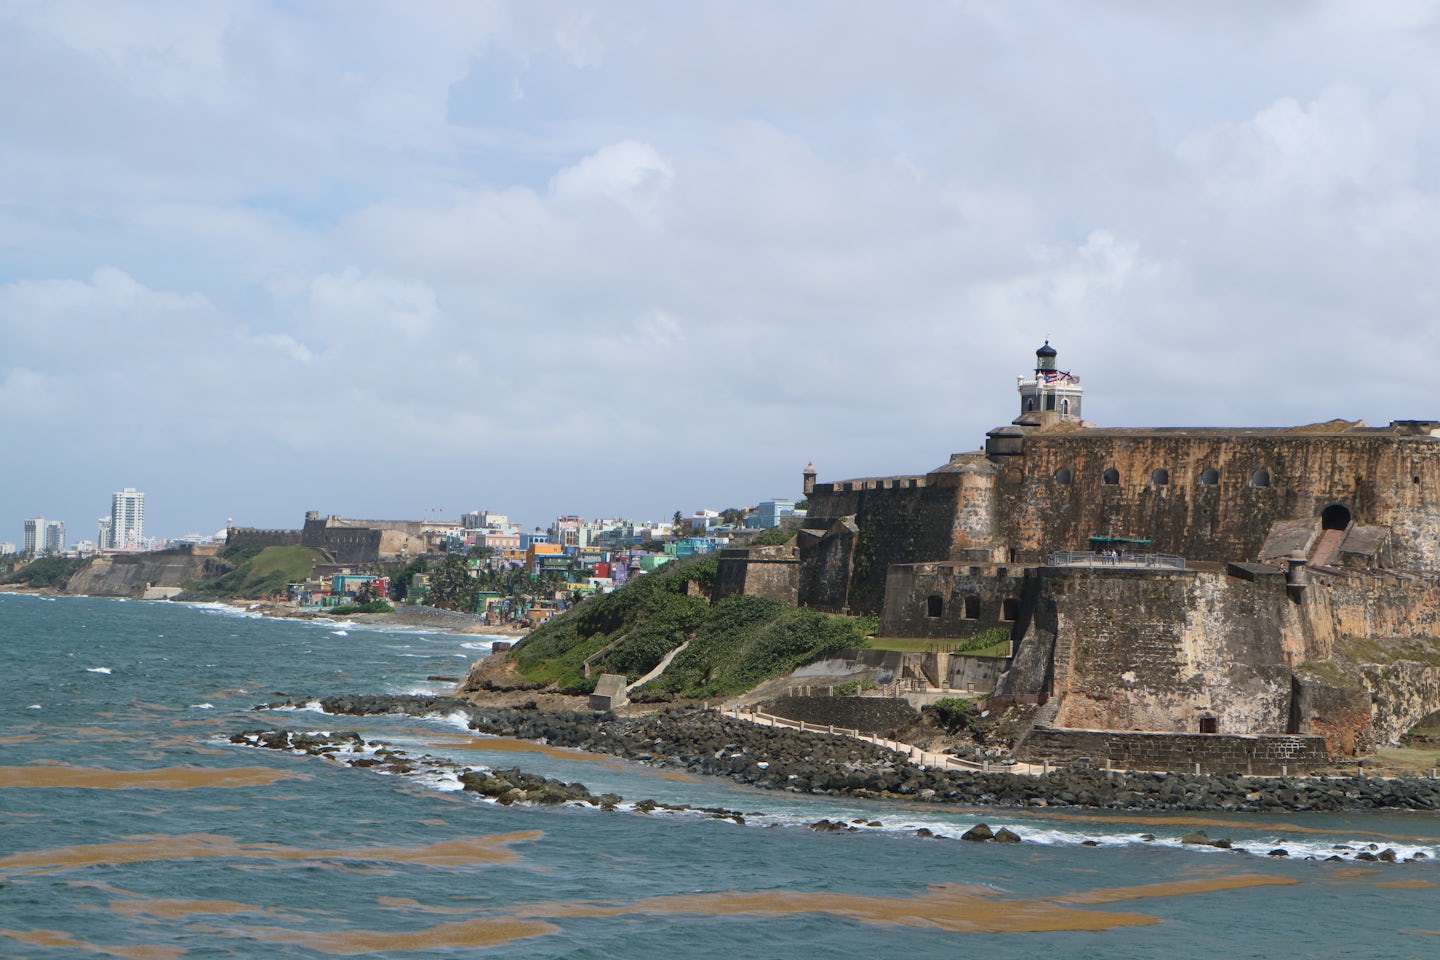 El Morro is San Juan. Great point of interest, but get ready to walk. The p